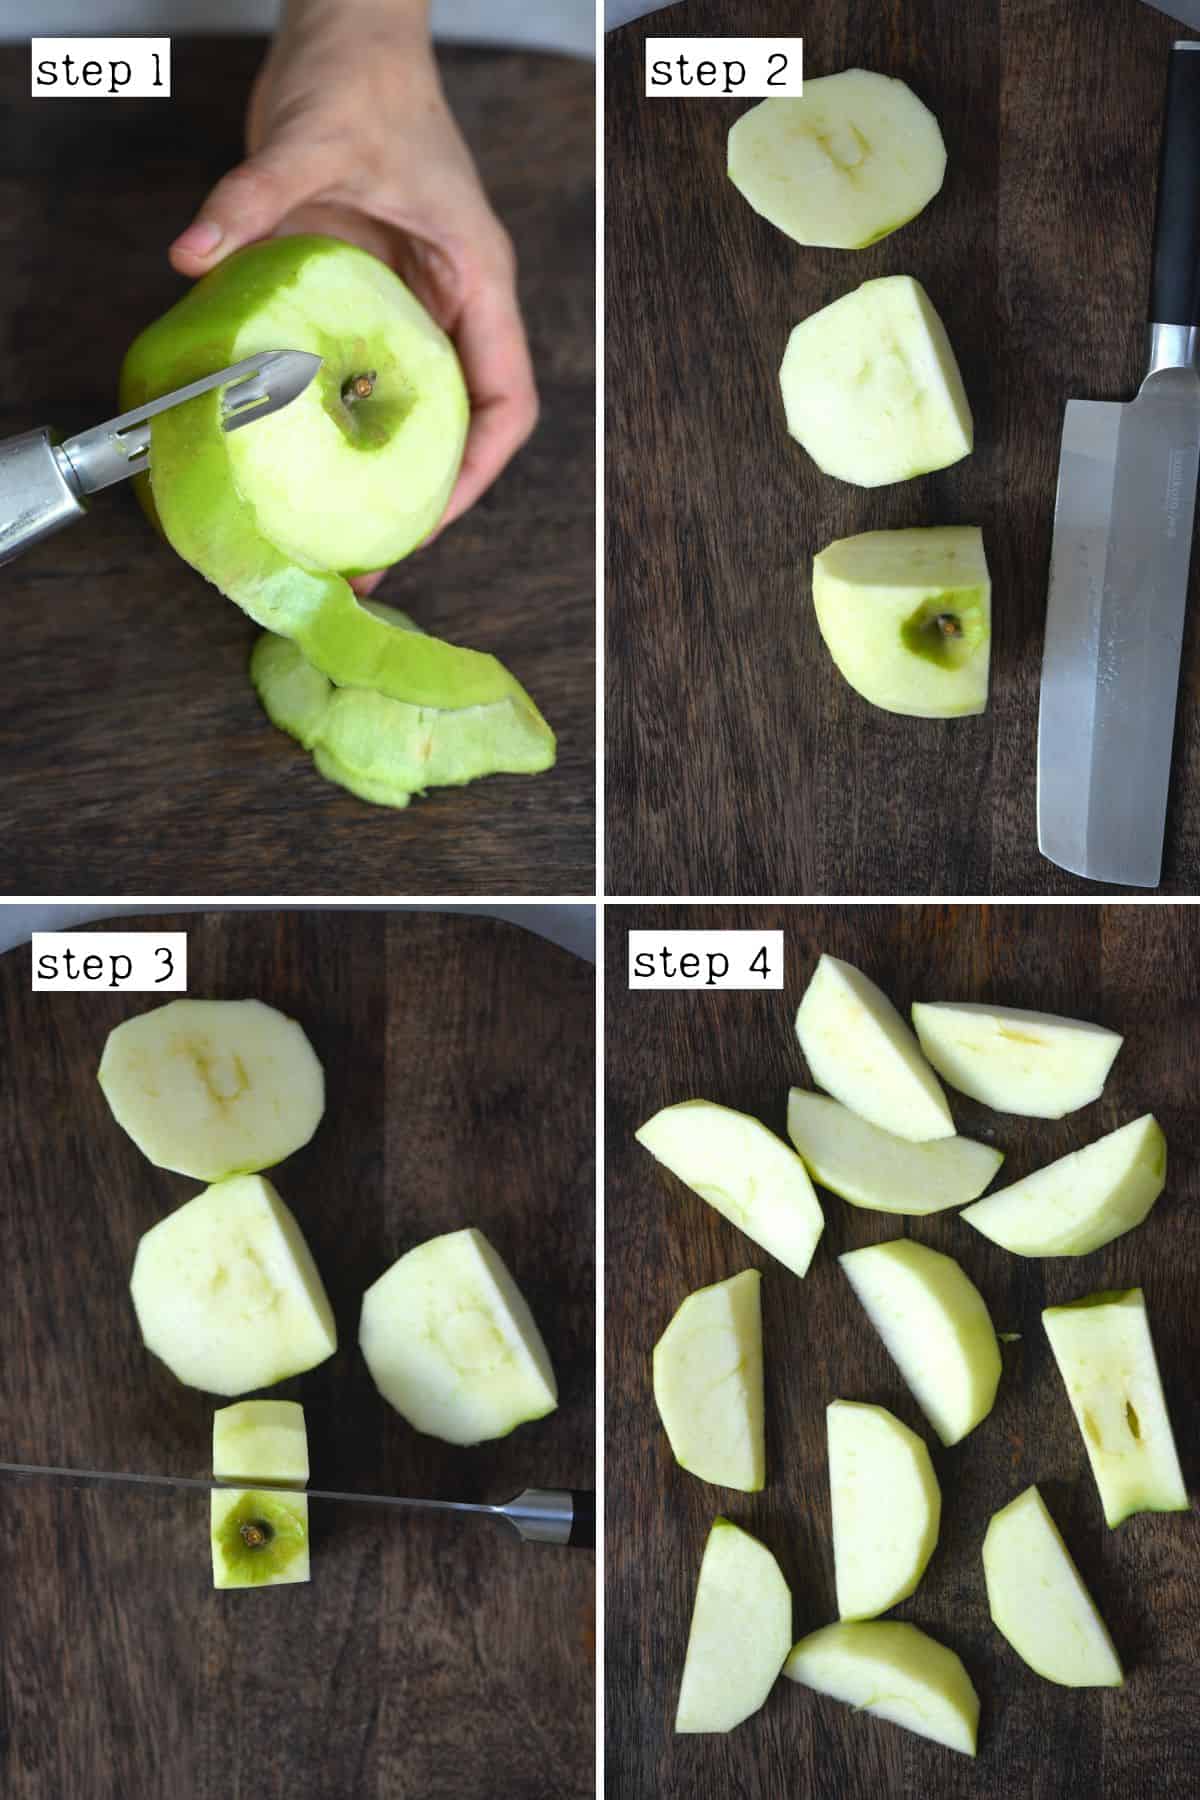 Steps for peeling and cutting an apple